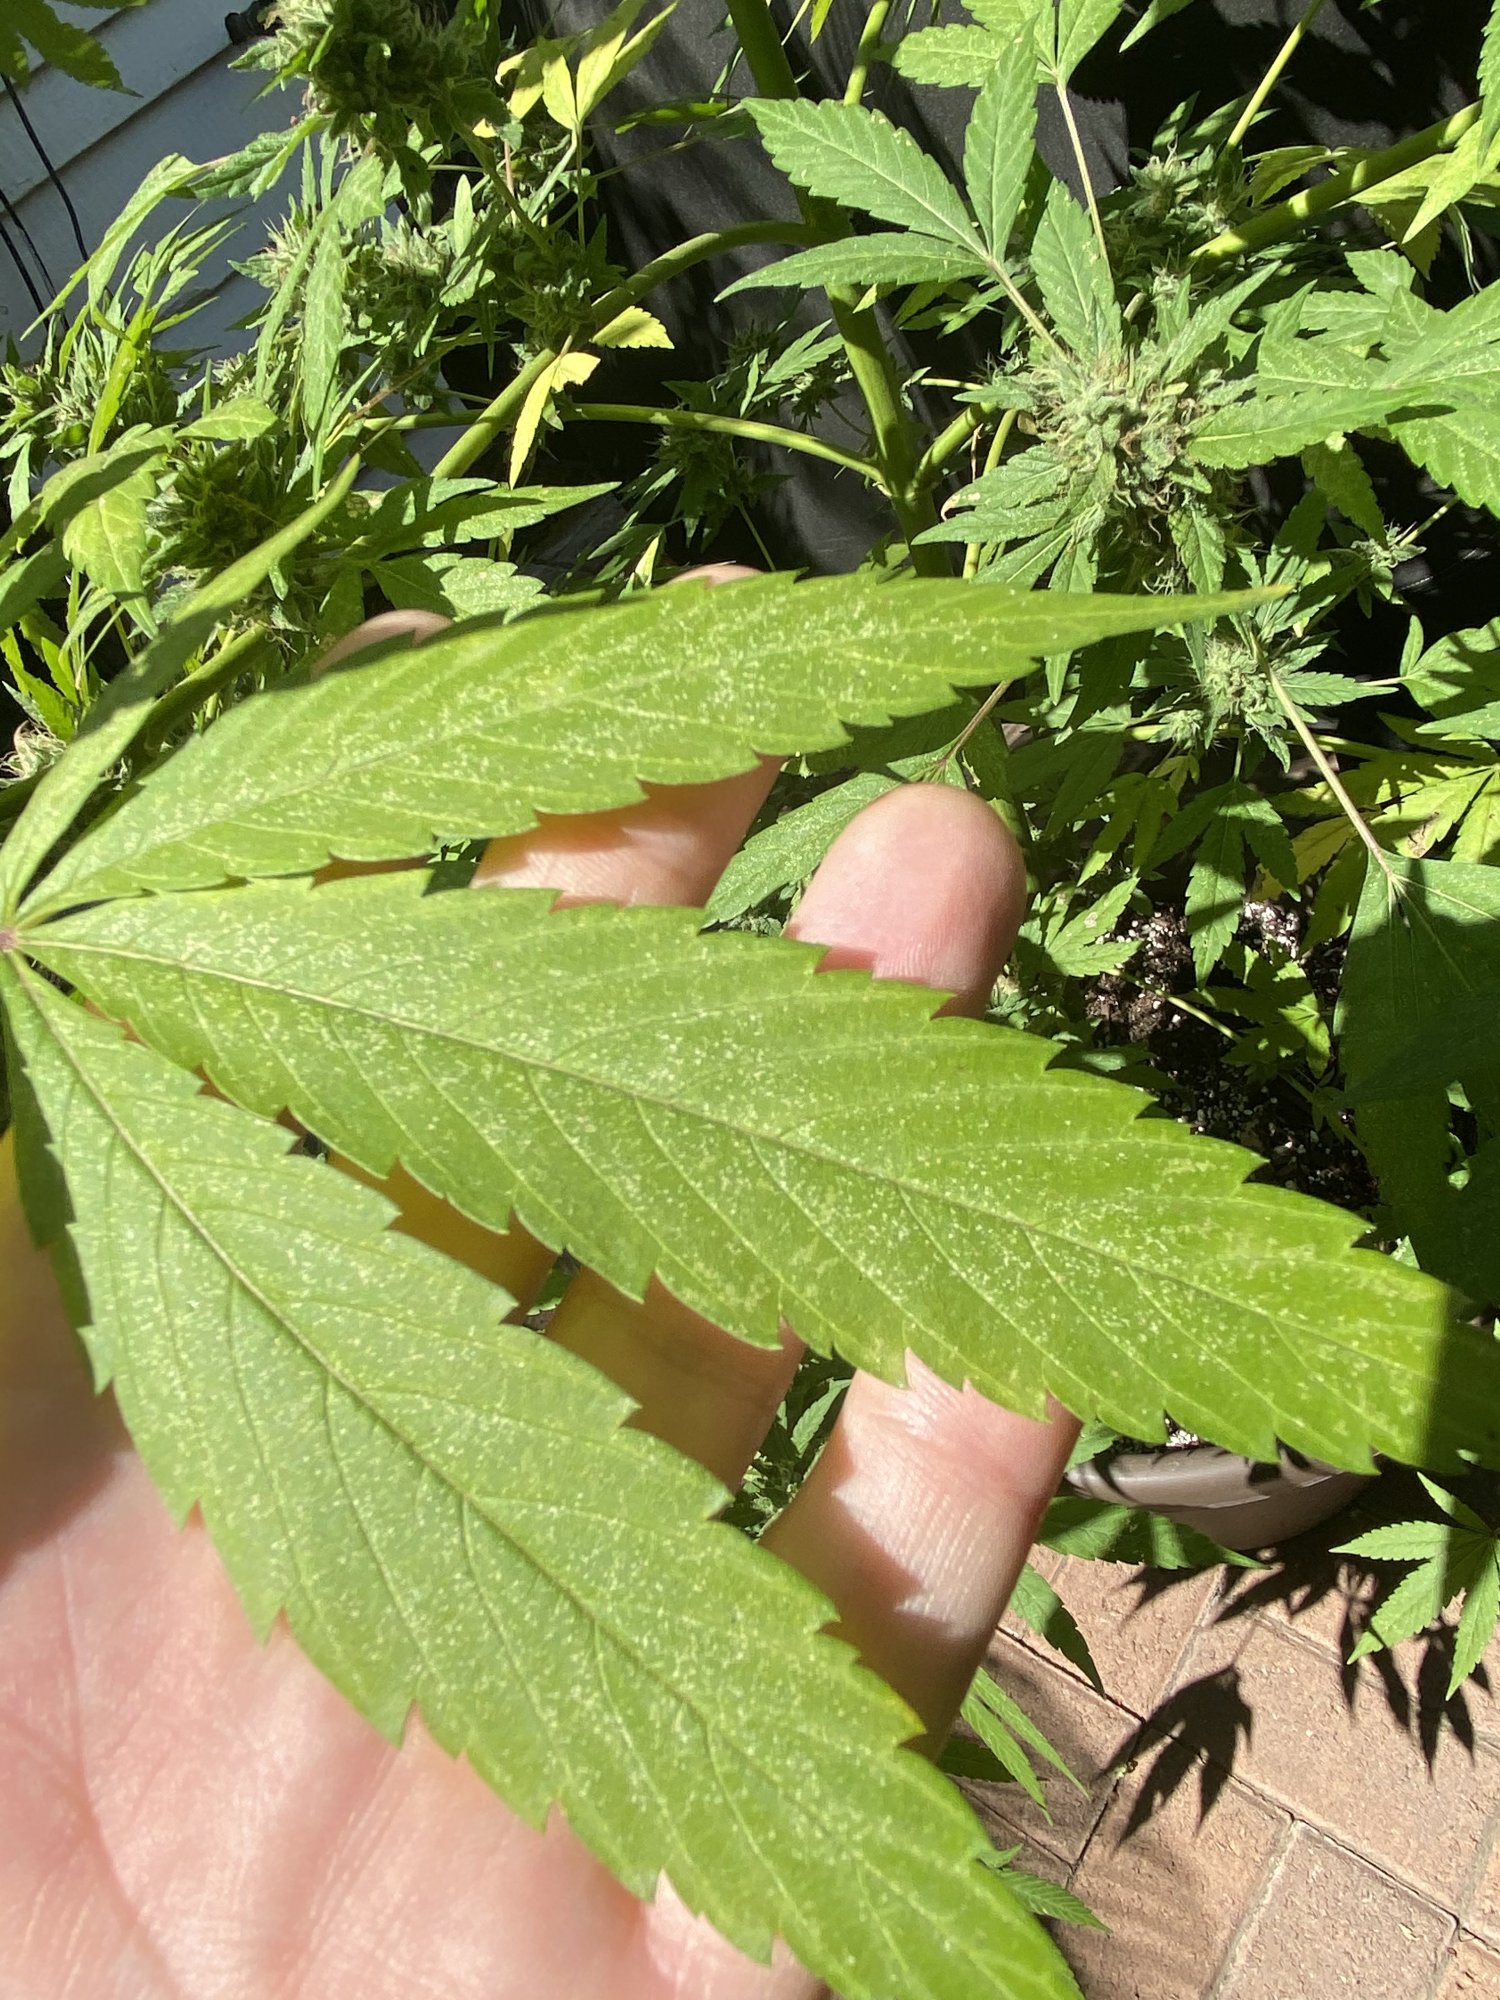 Leaning and possible nutrient deficiency 4